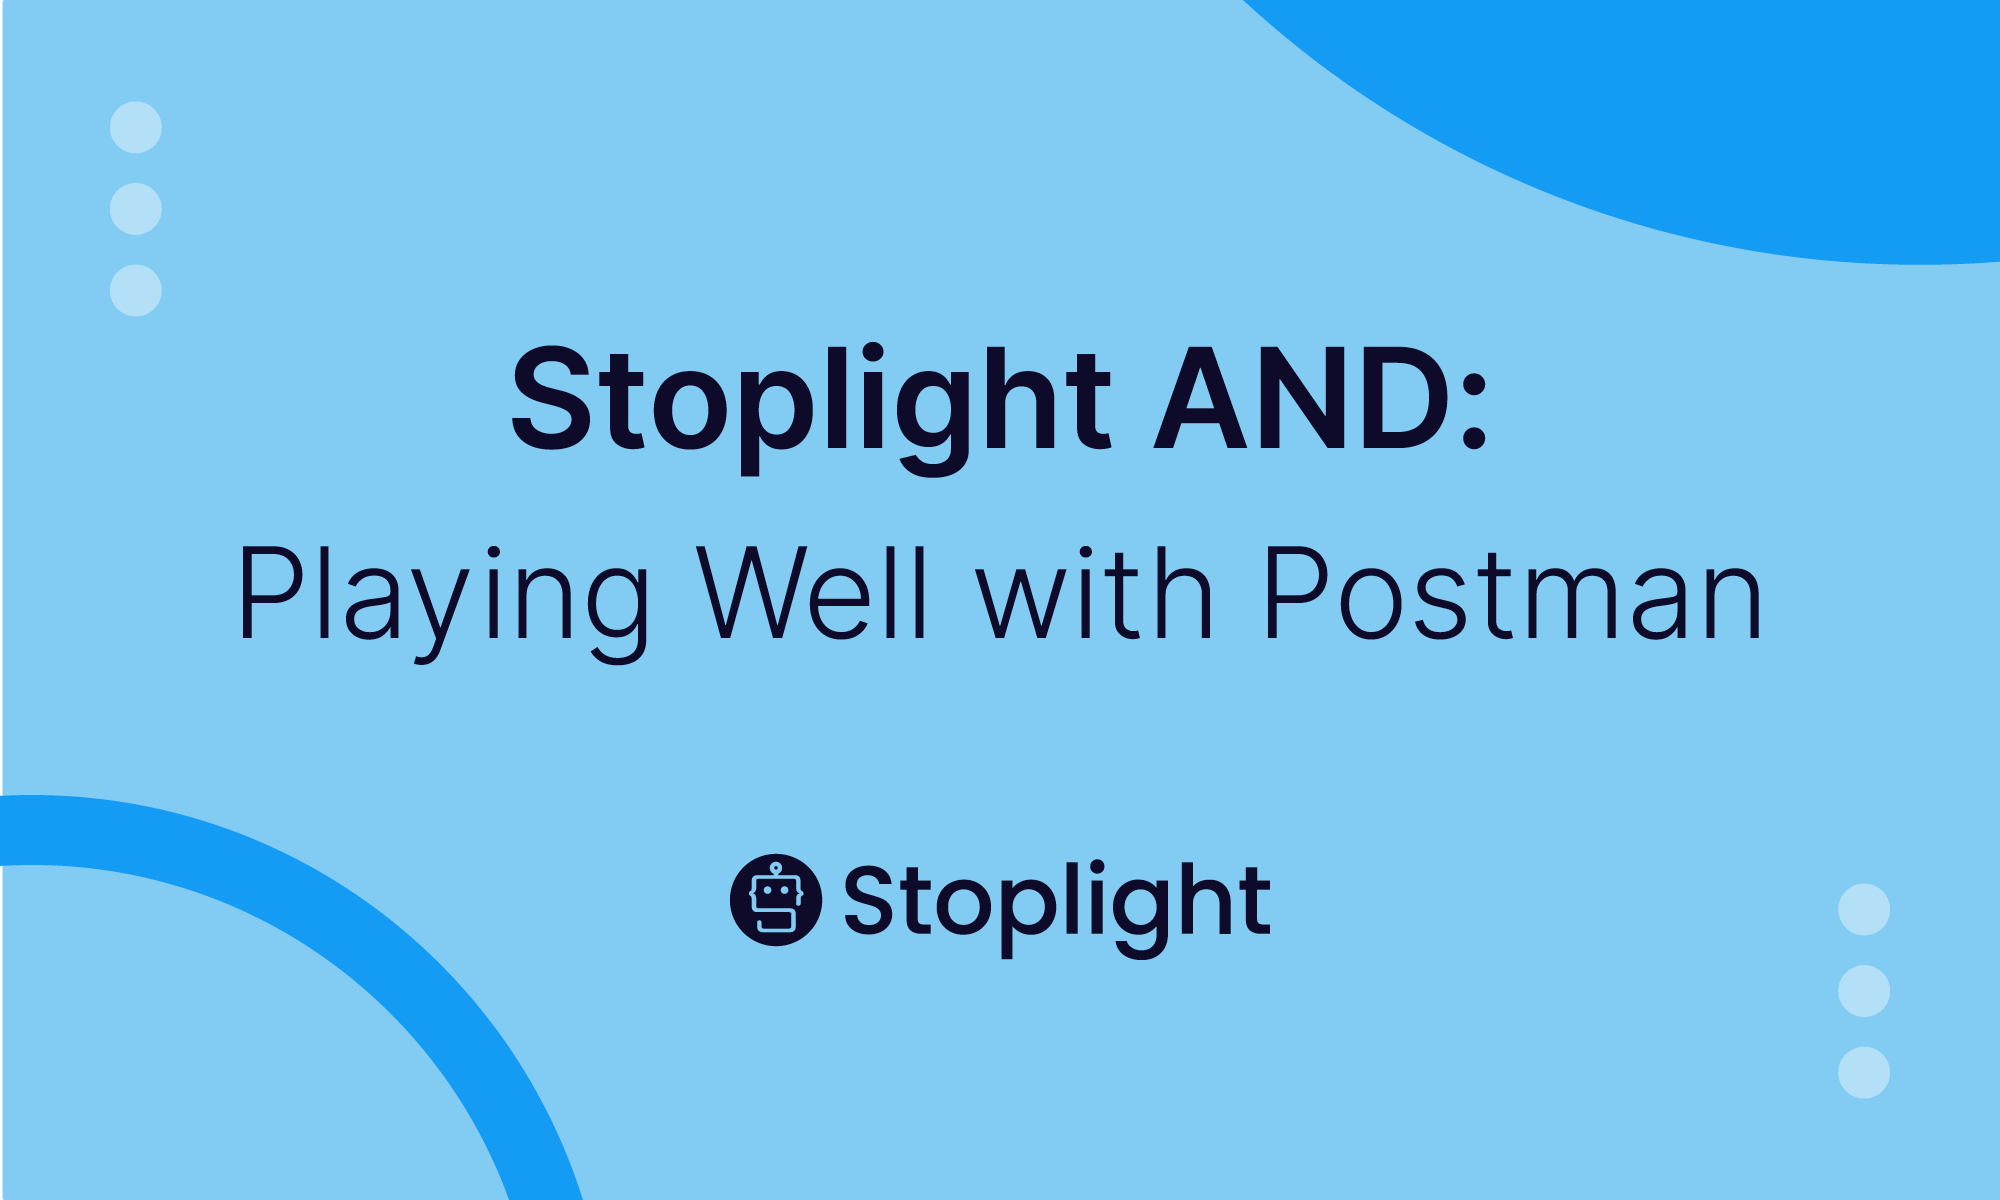 Stoplight AND: Playing well with Postman